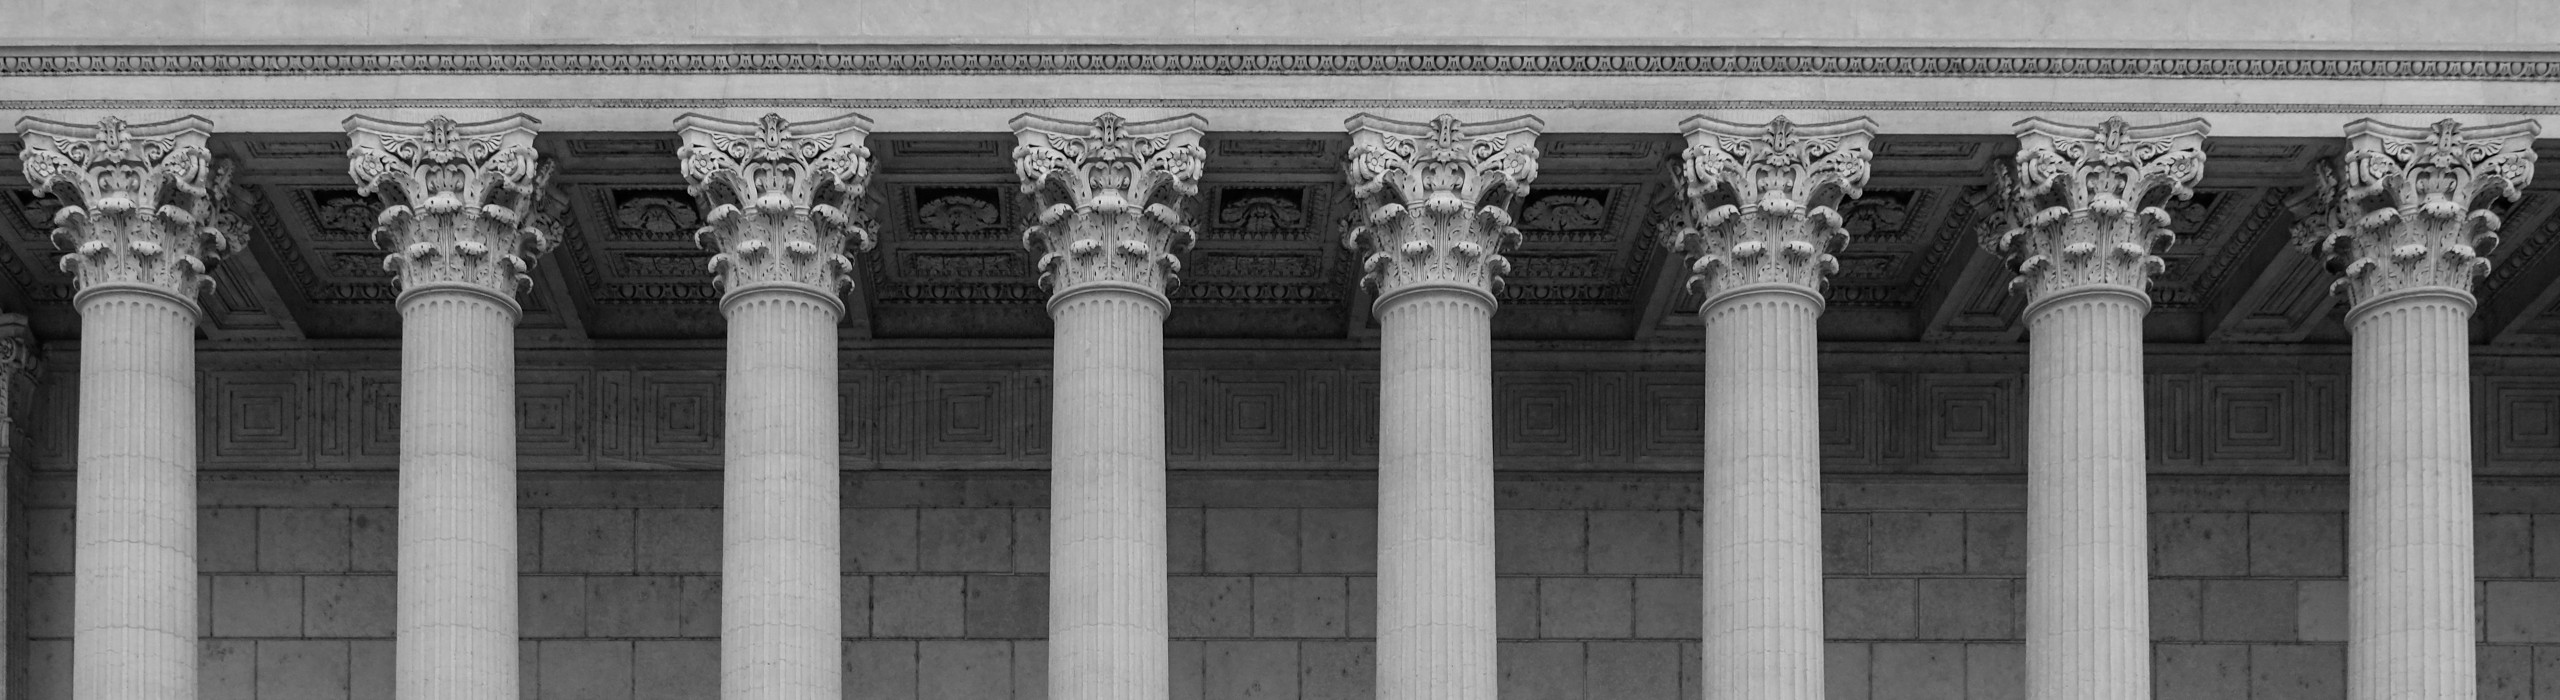 Farrell Thurman & Flammer, P.C. signature banner of courthouse pillars in black and white.